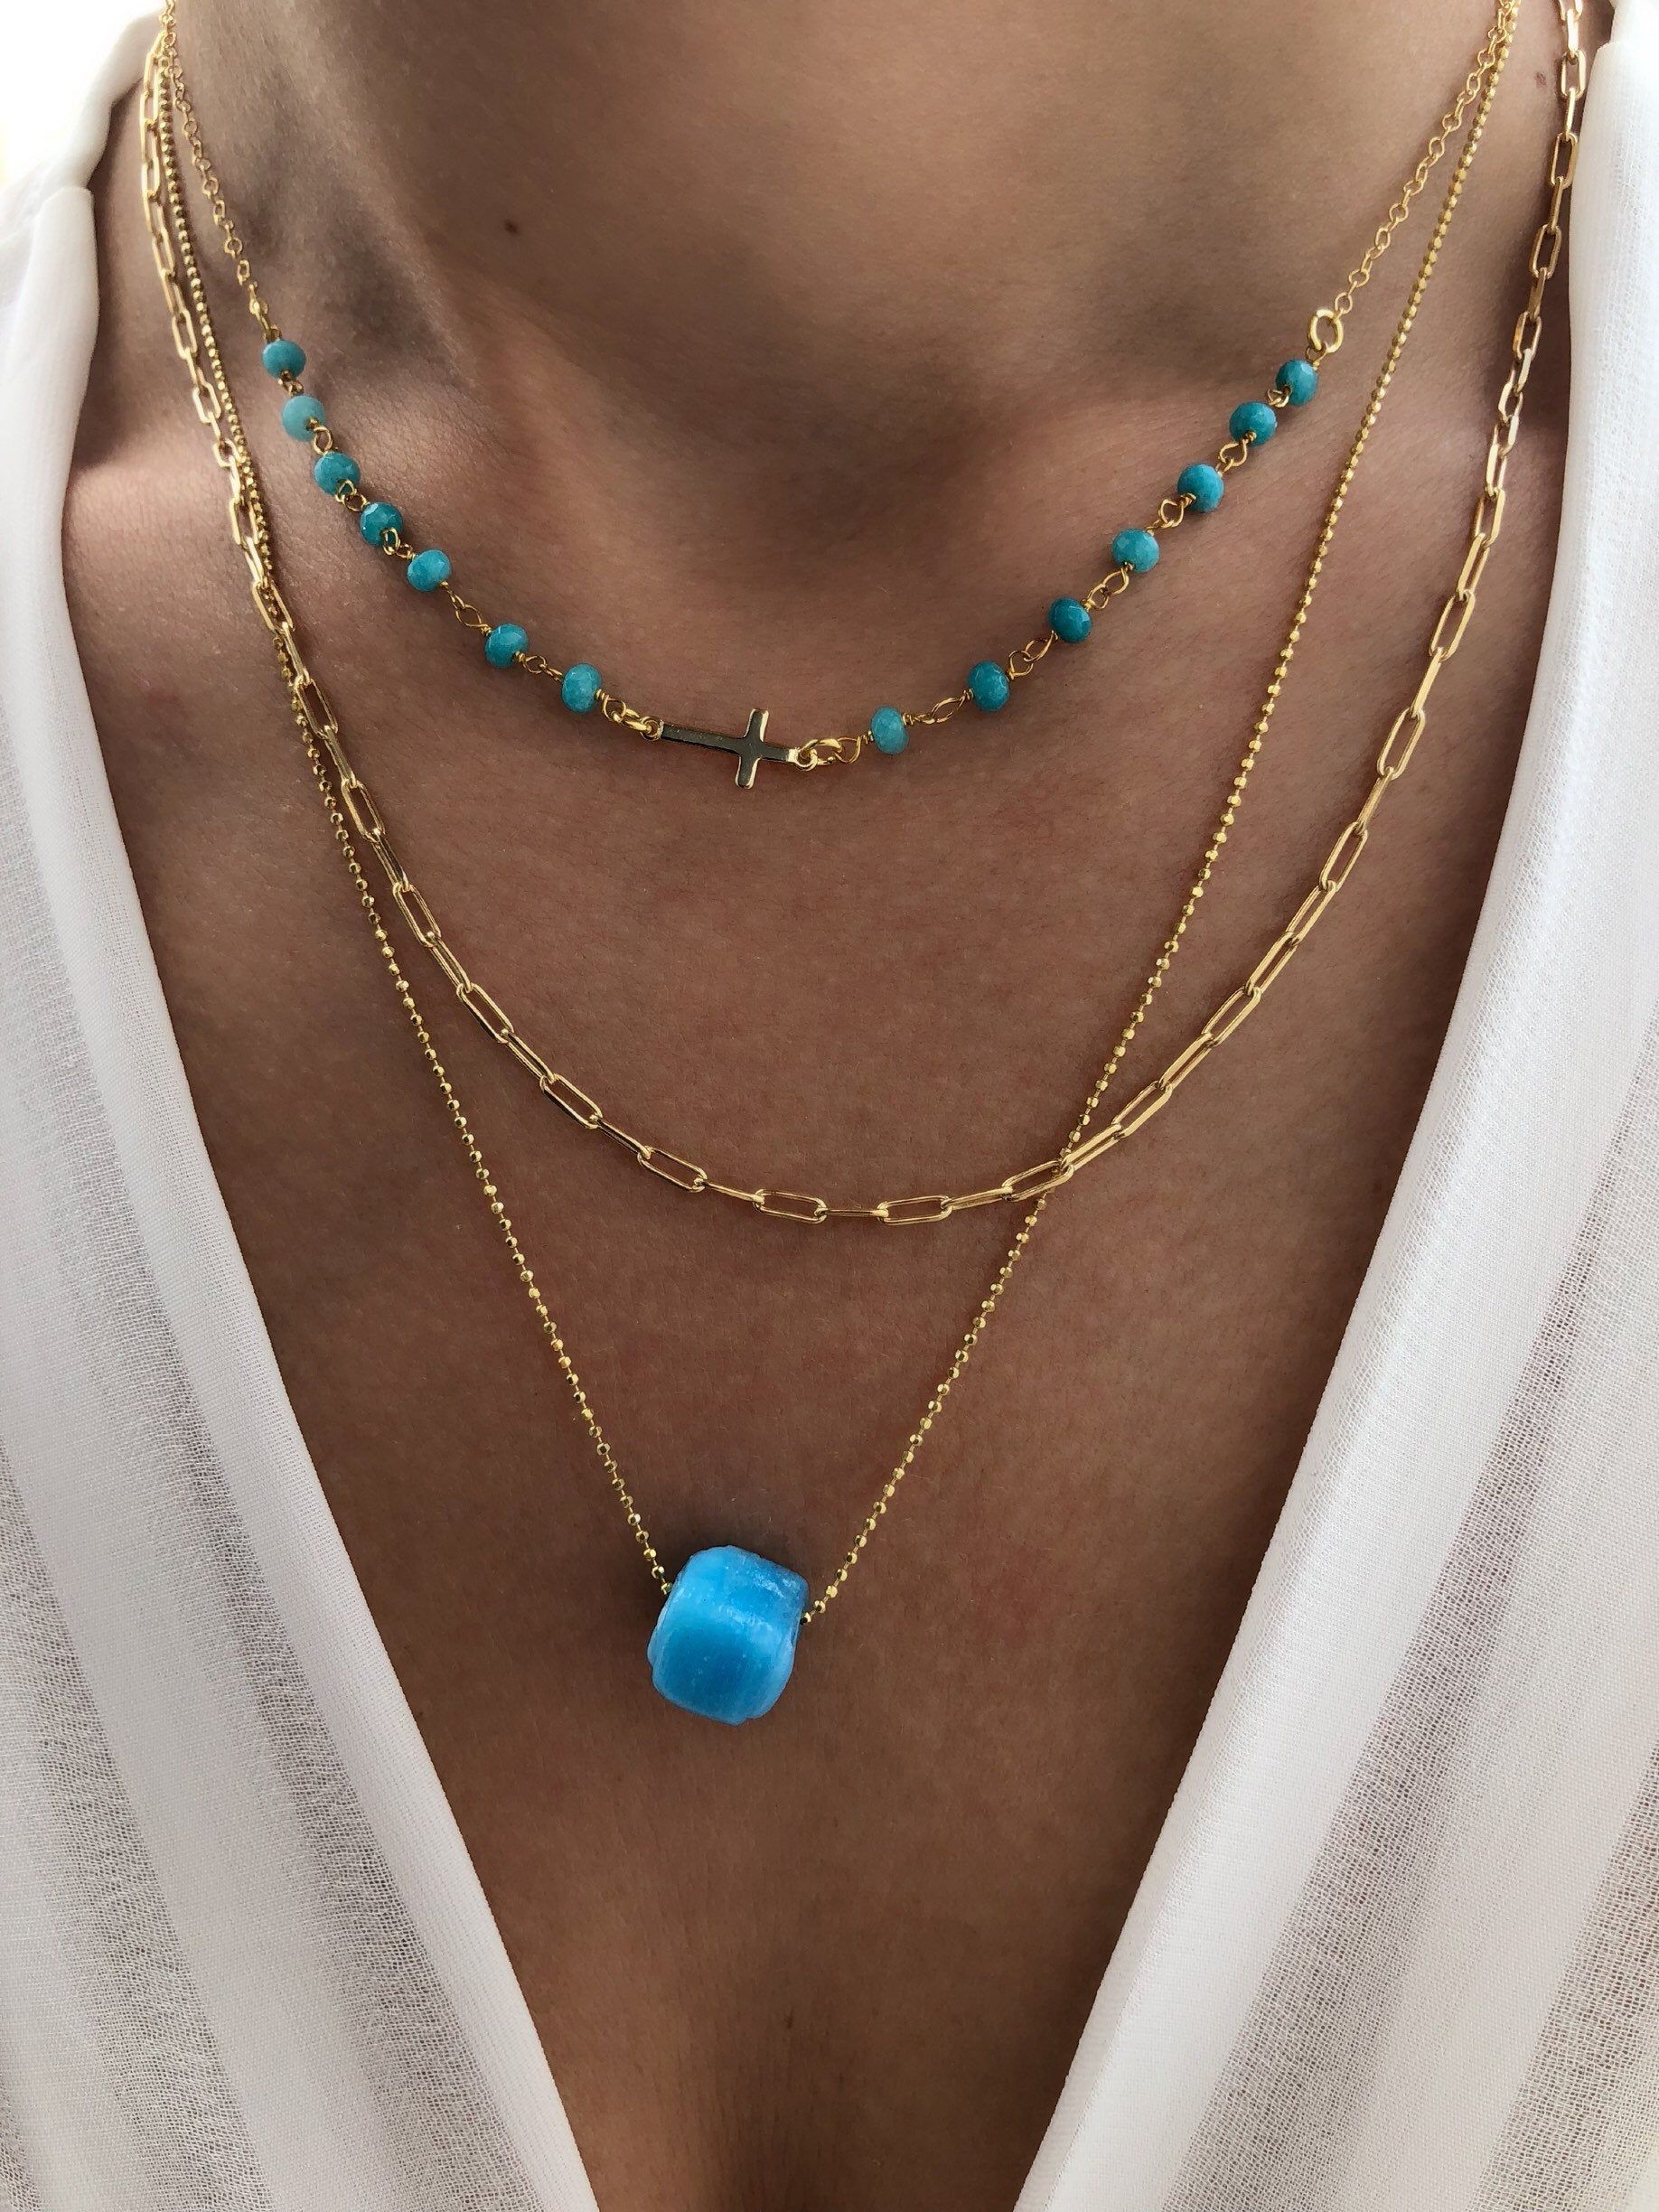 Get elegant and unique look with stylish turquoise necklace